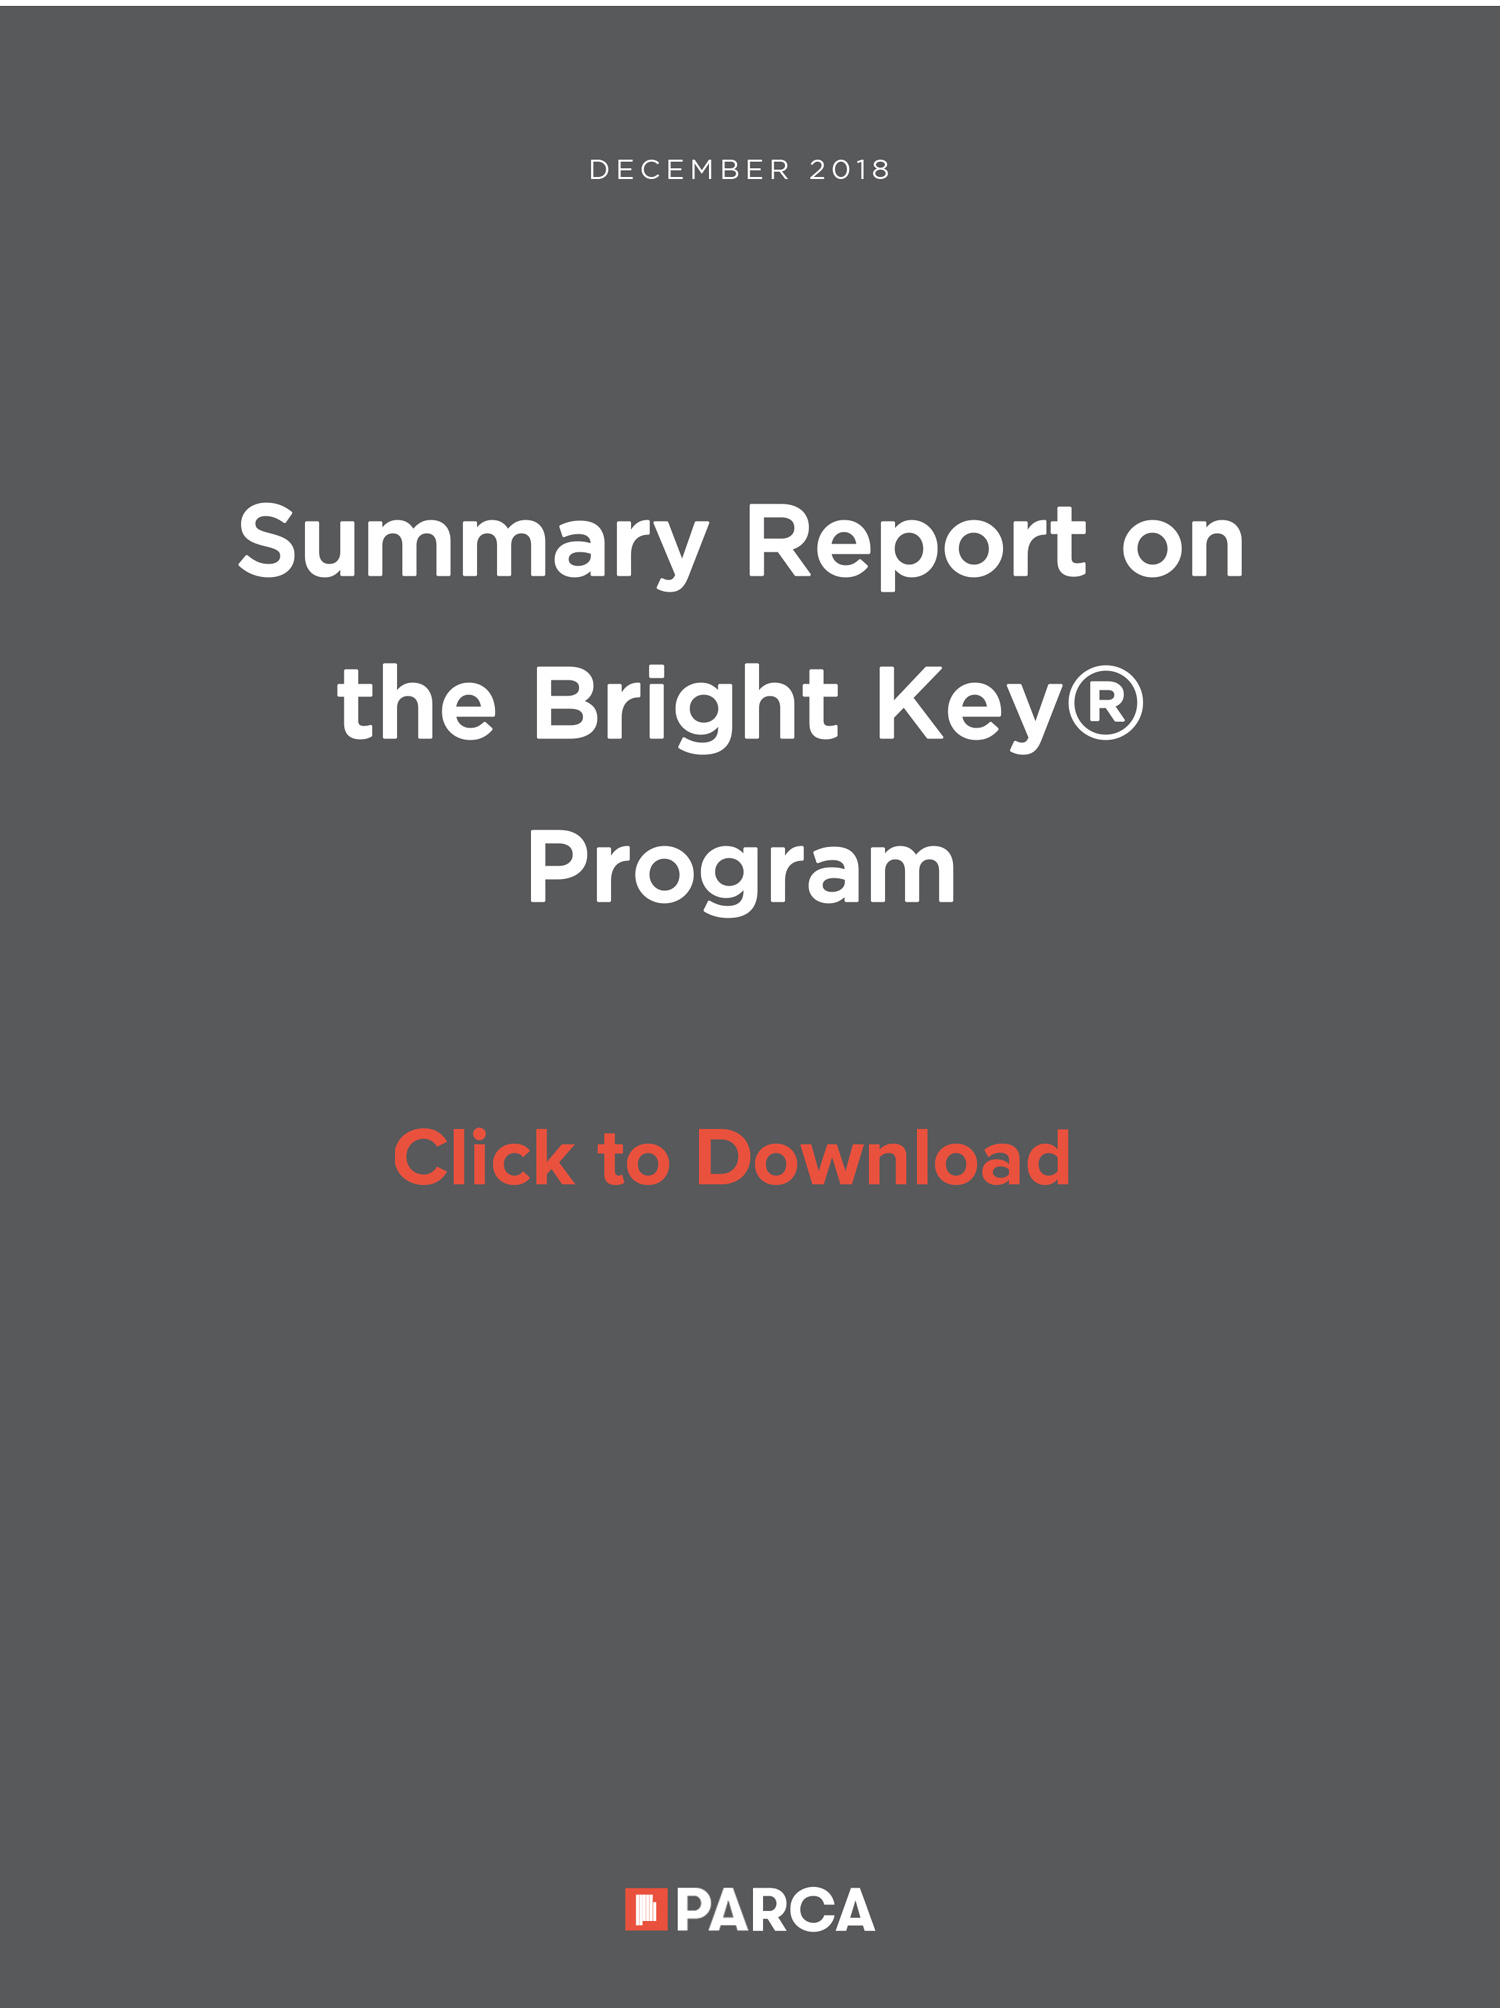 View the 2018 Summary Report on the Bright Key Program